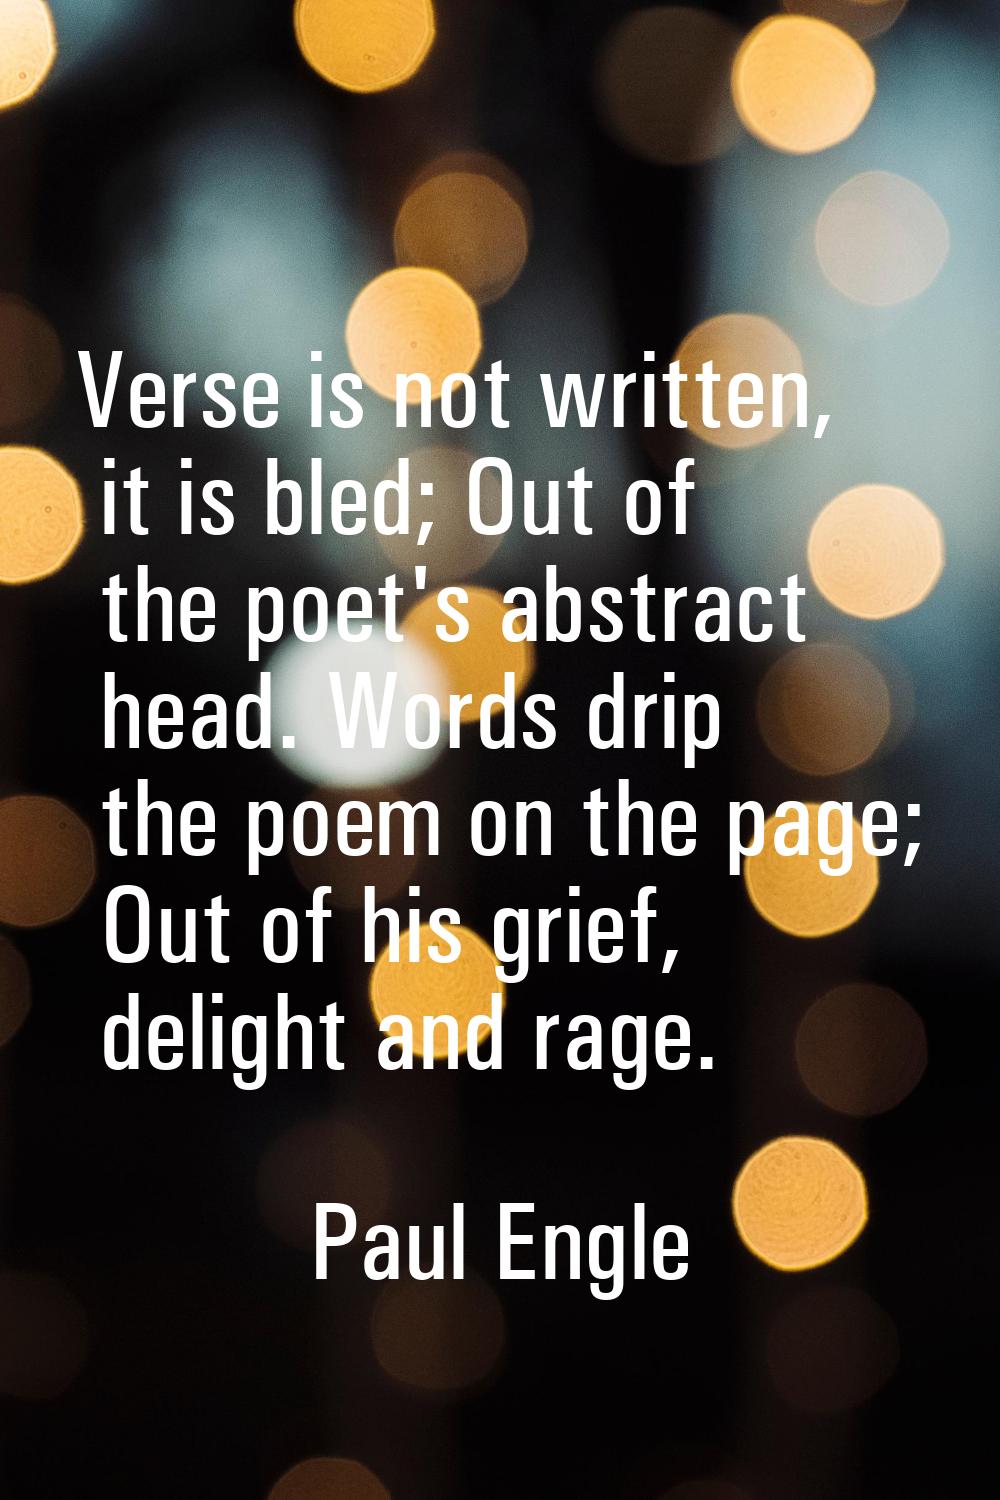 Verse is not written, it is bled; Out of the poet's abstract head. Words drip the poem on the page;